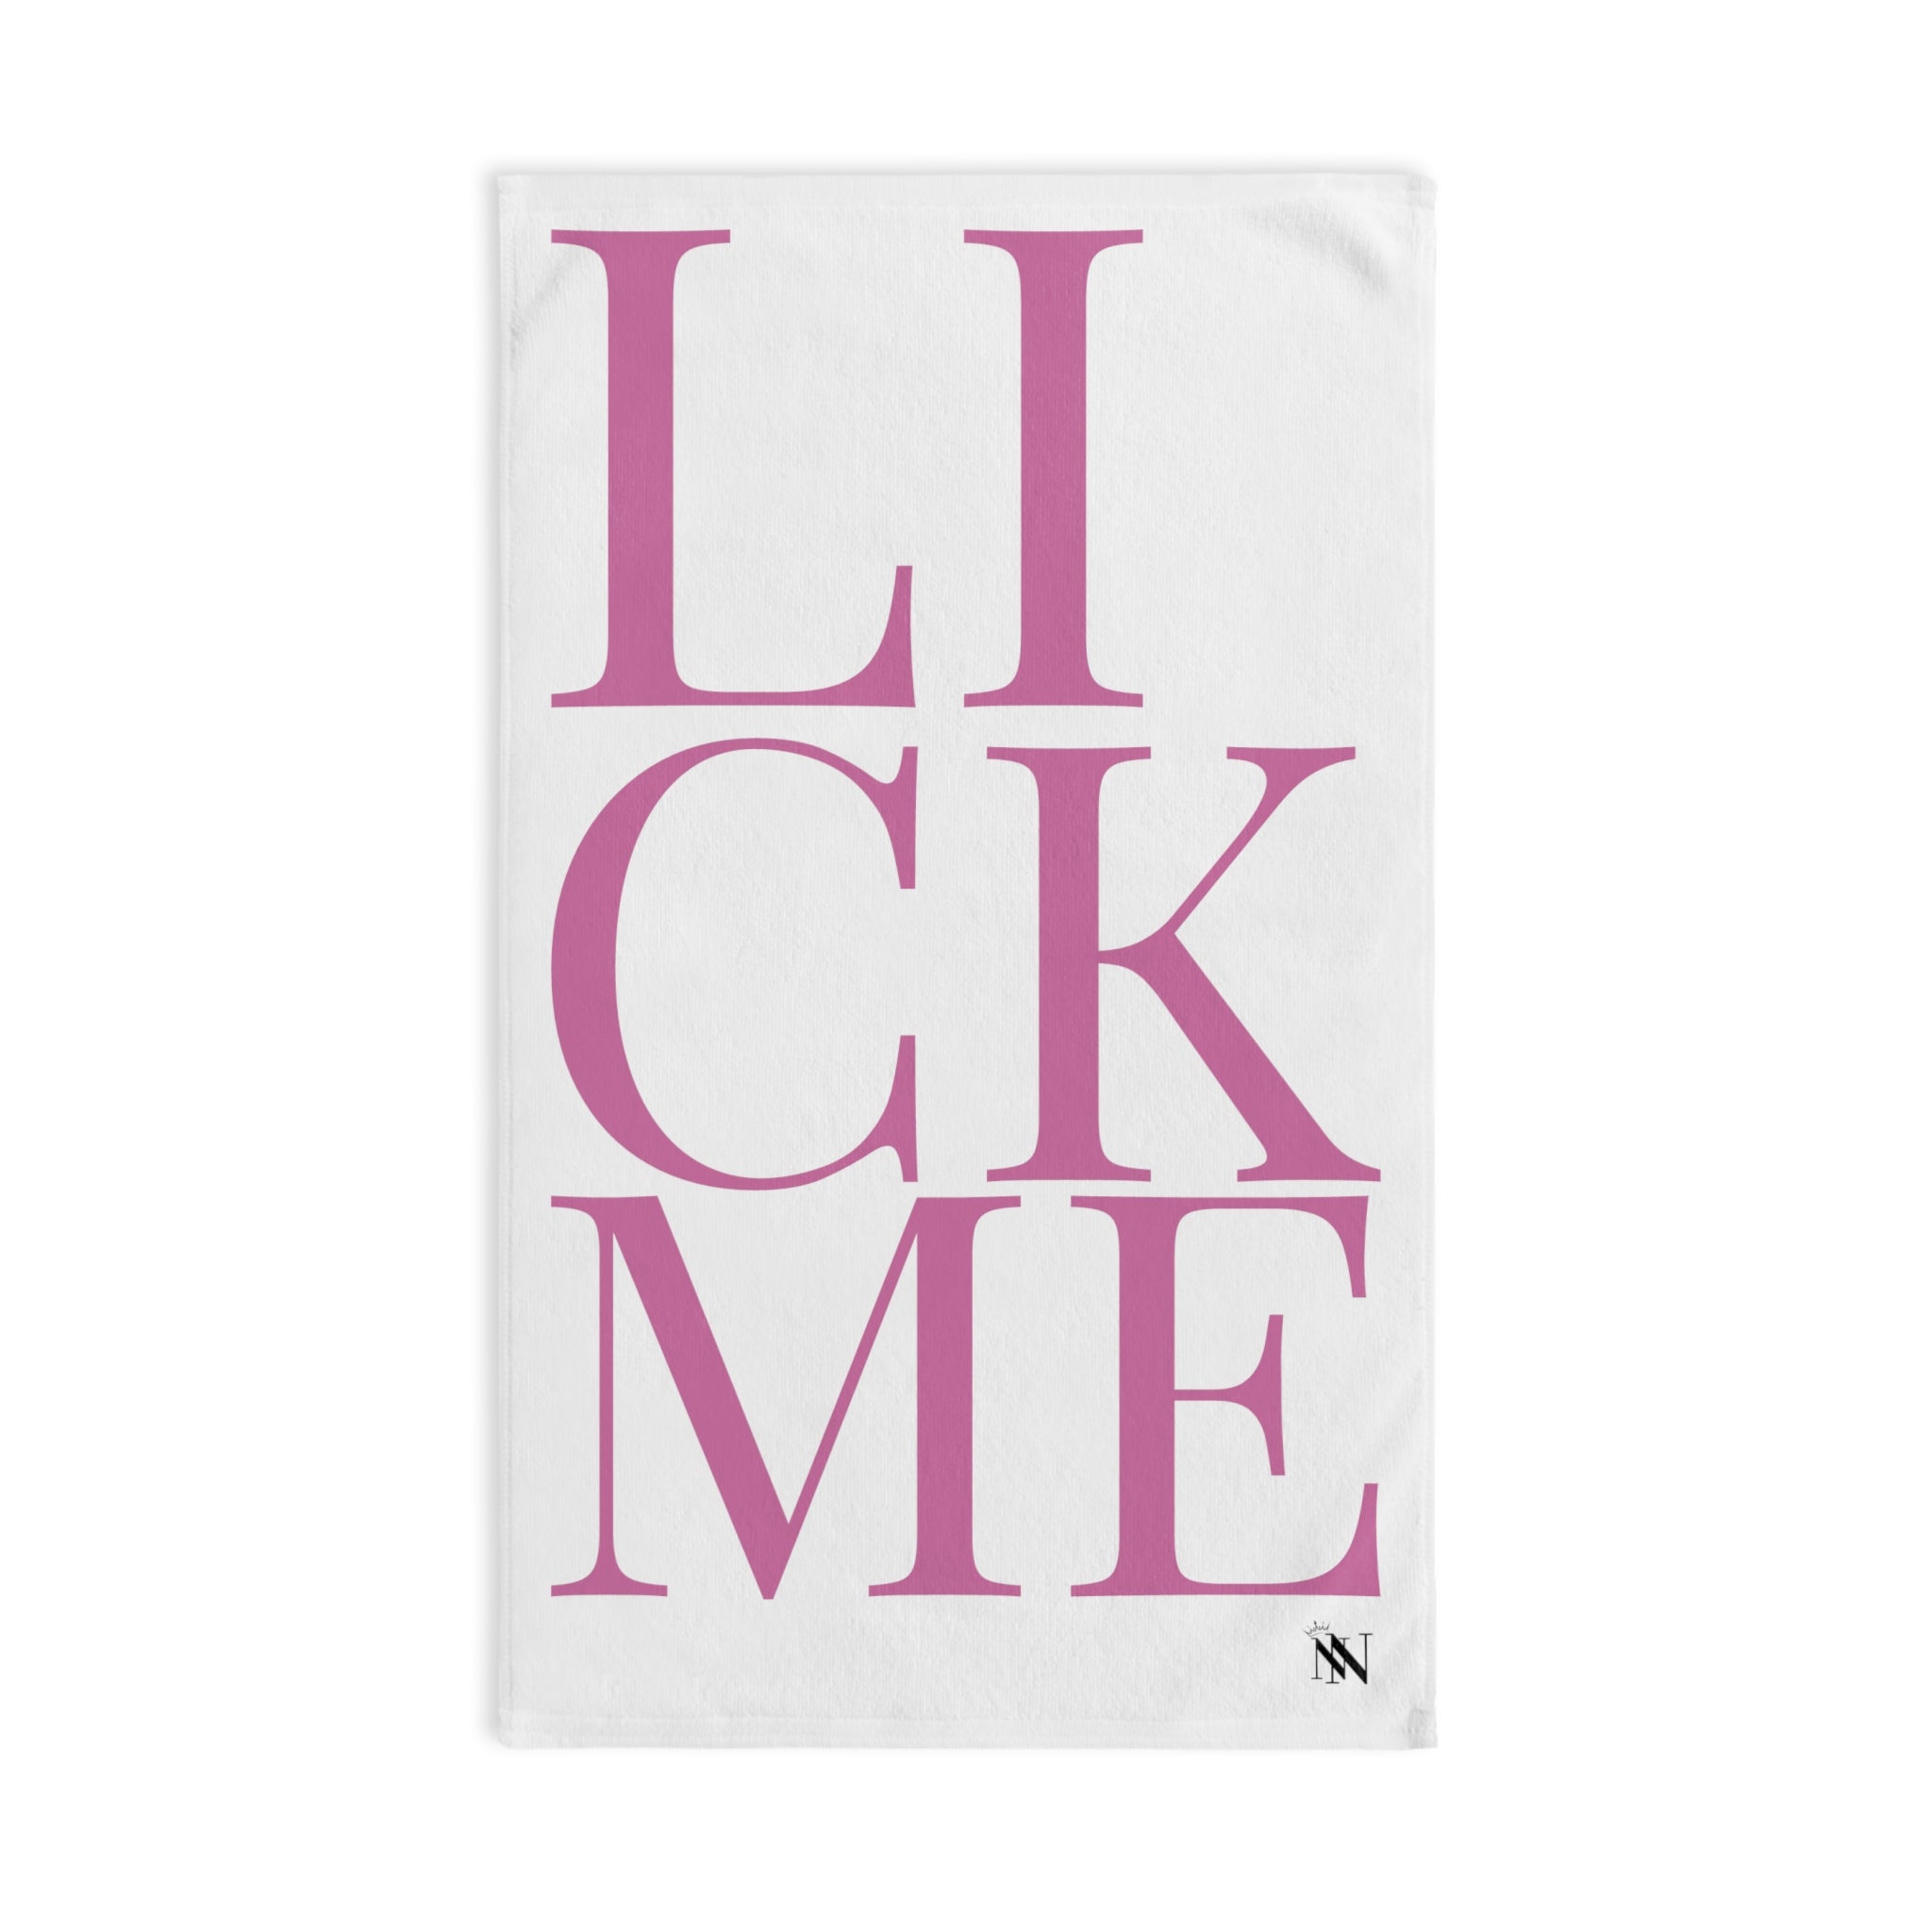 Lick Me PinkWhite | Funny Gifts for Men - Gifts for Him - Birthday Gifts for Men, Him, Her, Husband, Boyfriend, Girlfriend, New Couple Gifts, Fathers & Valentines Day Gifts, Christmas Gifts NECTAR NAPKINS